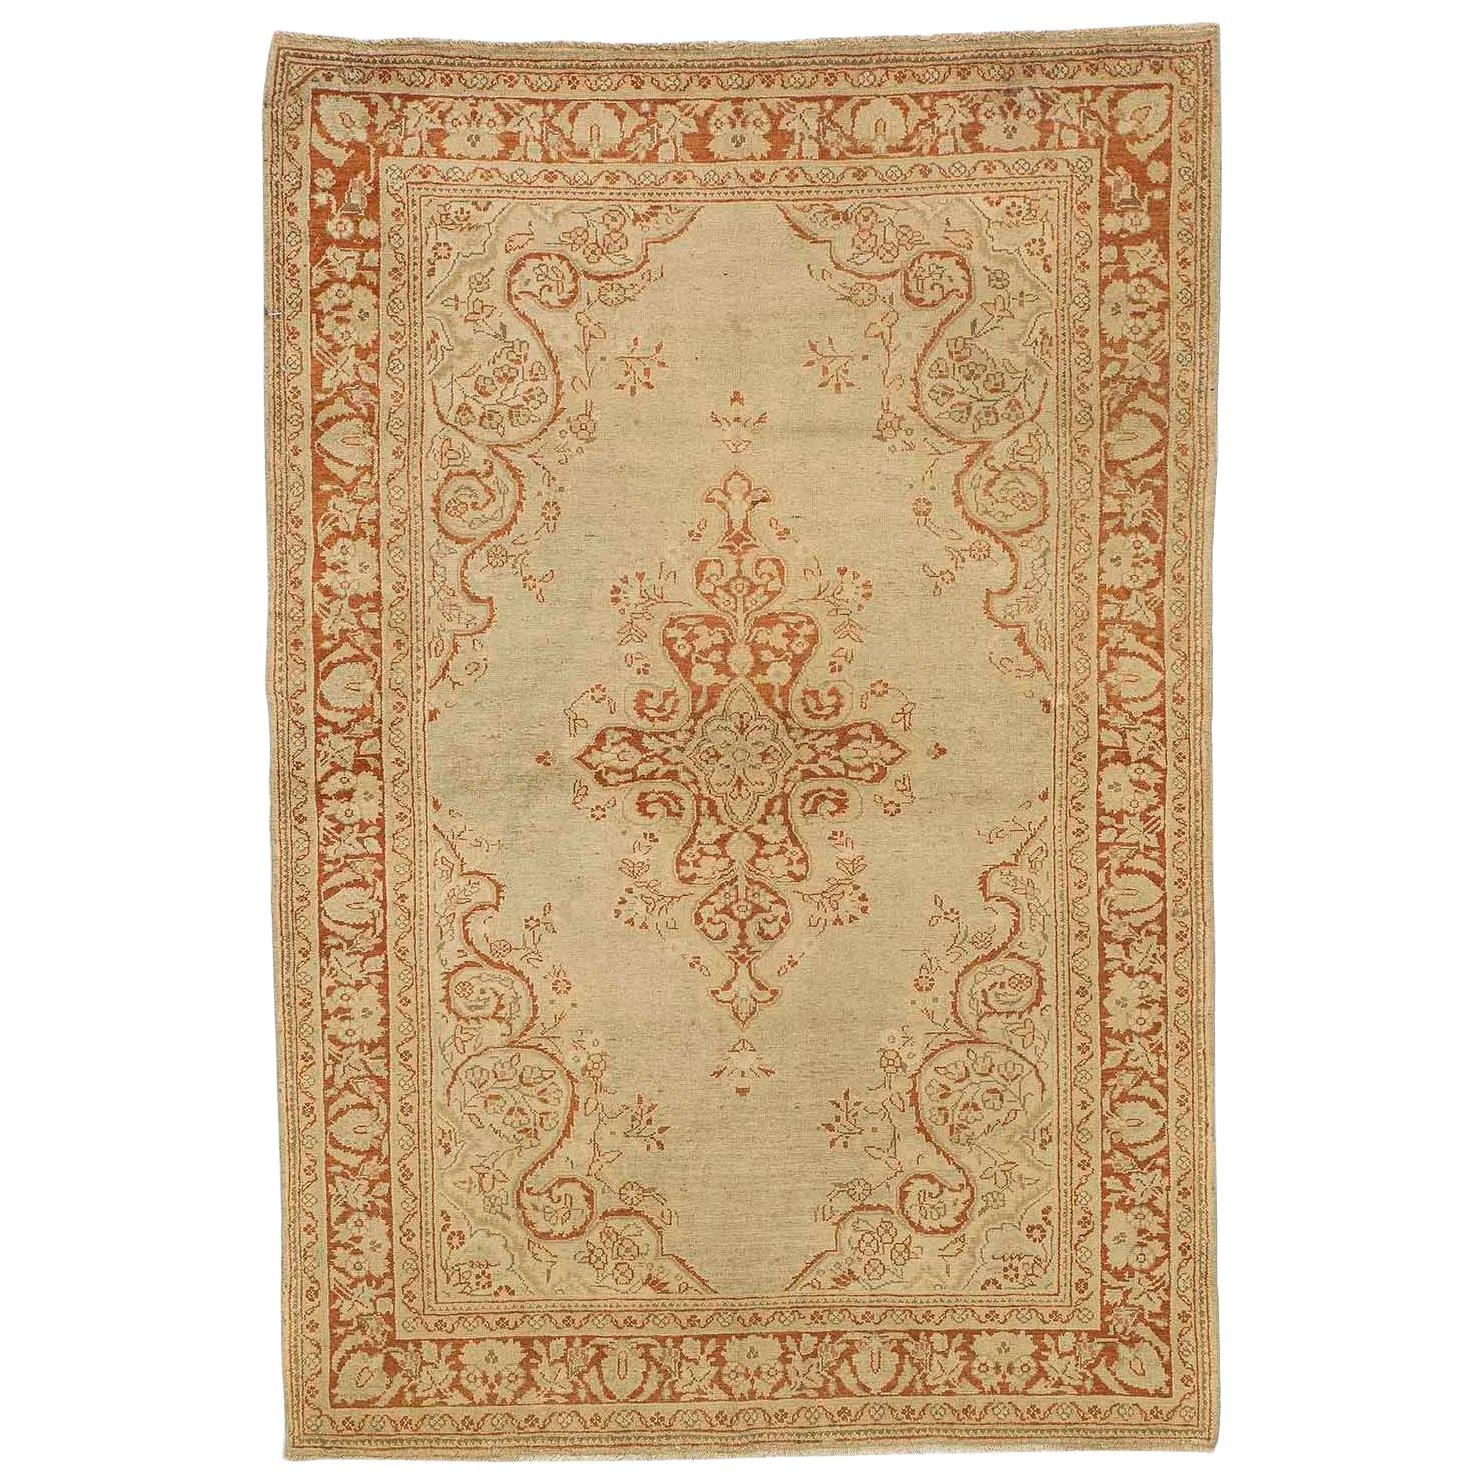 Antique Persian Khamseh Rug with Pink and Ivory Floral Details on Brown Field